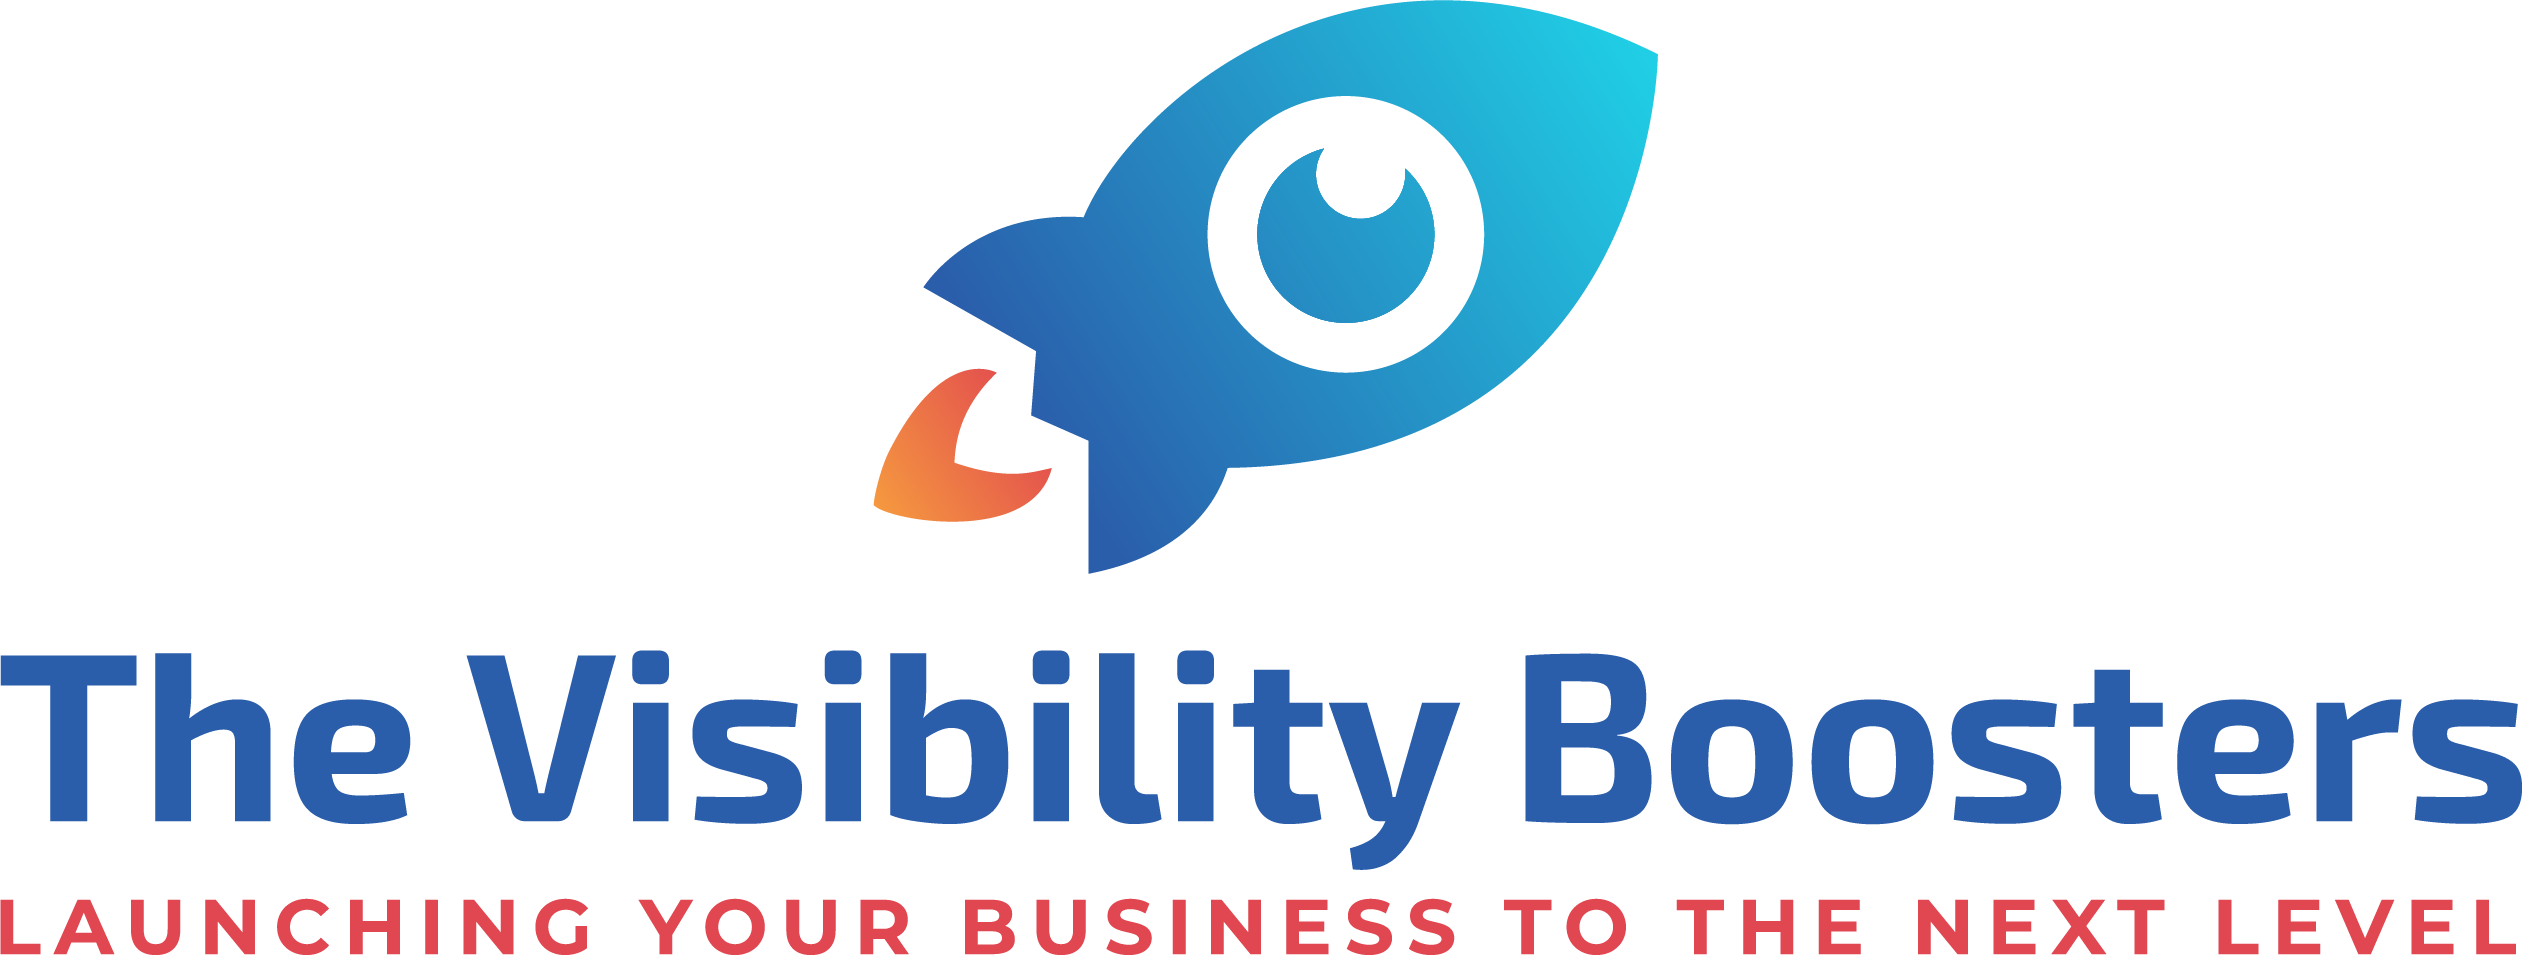 The-Visibility-Boosters-Logo.png